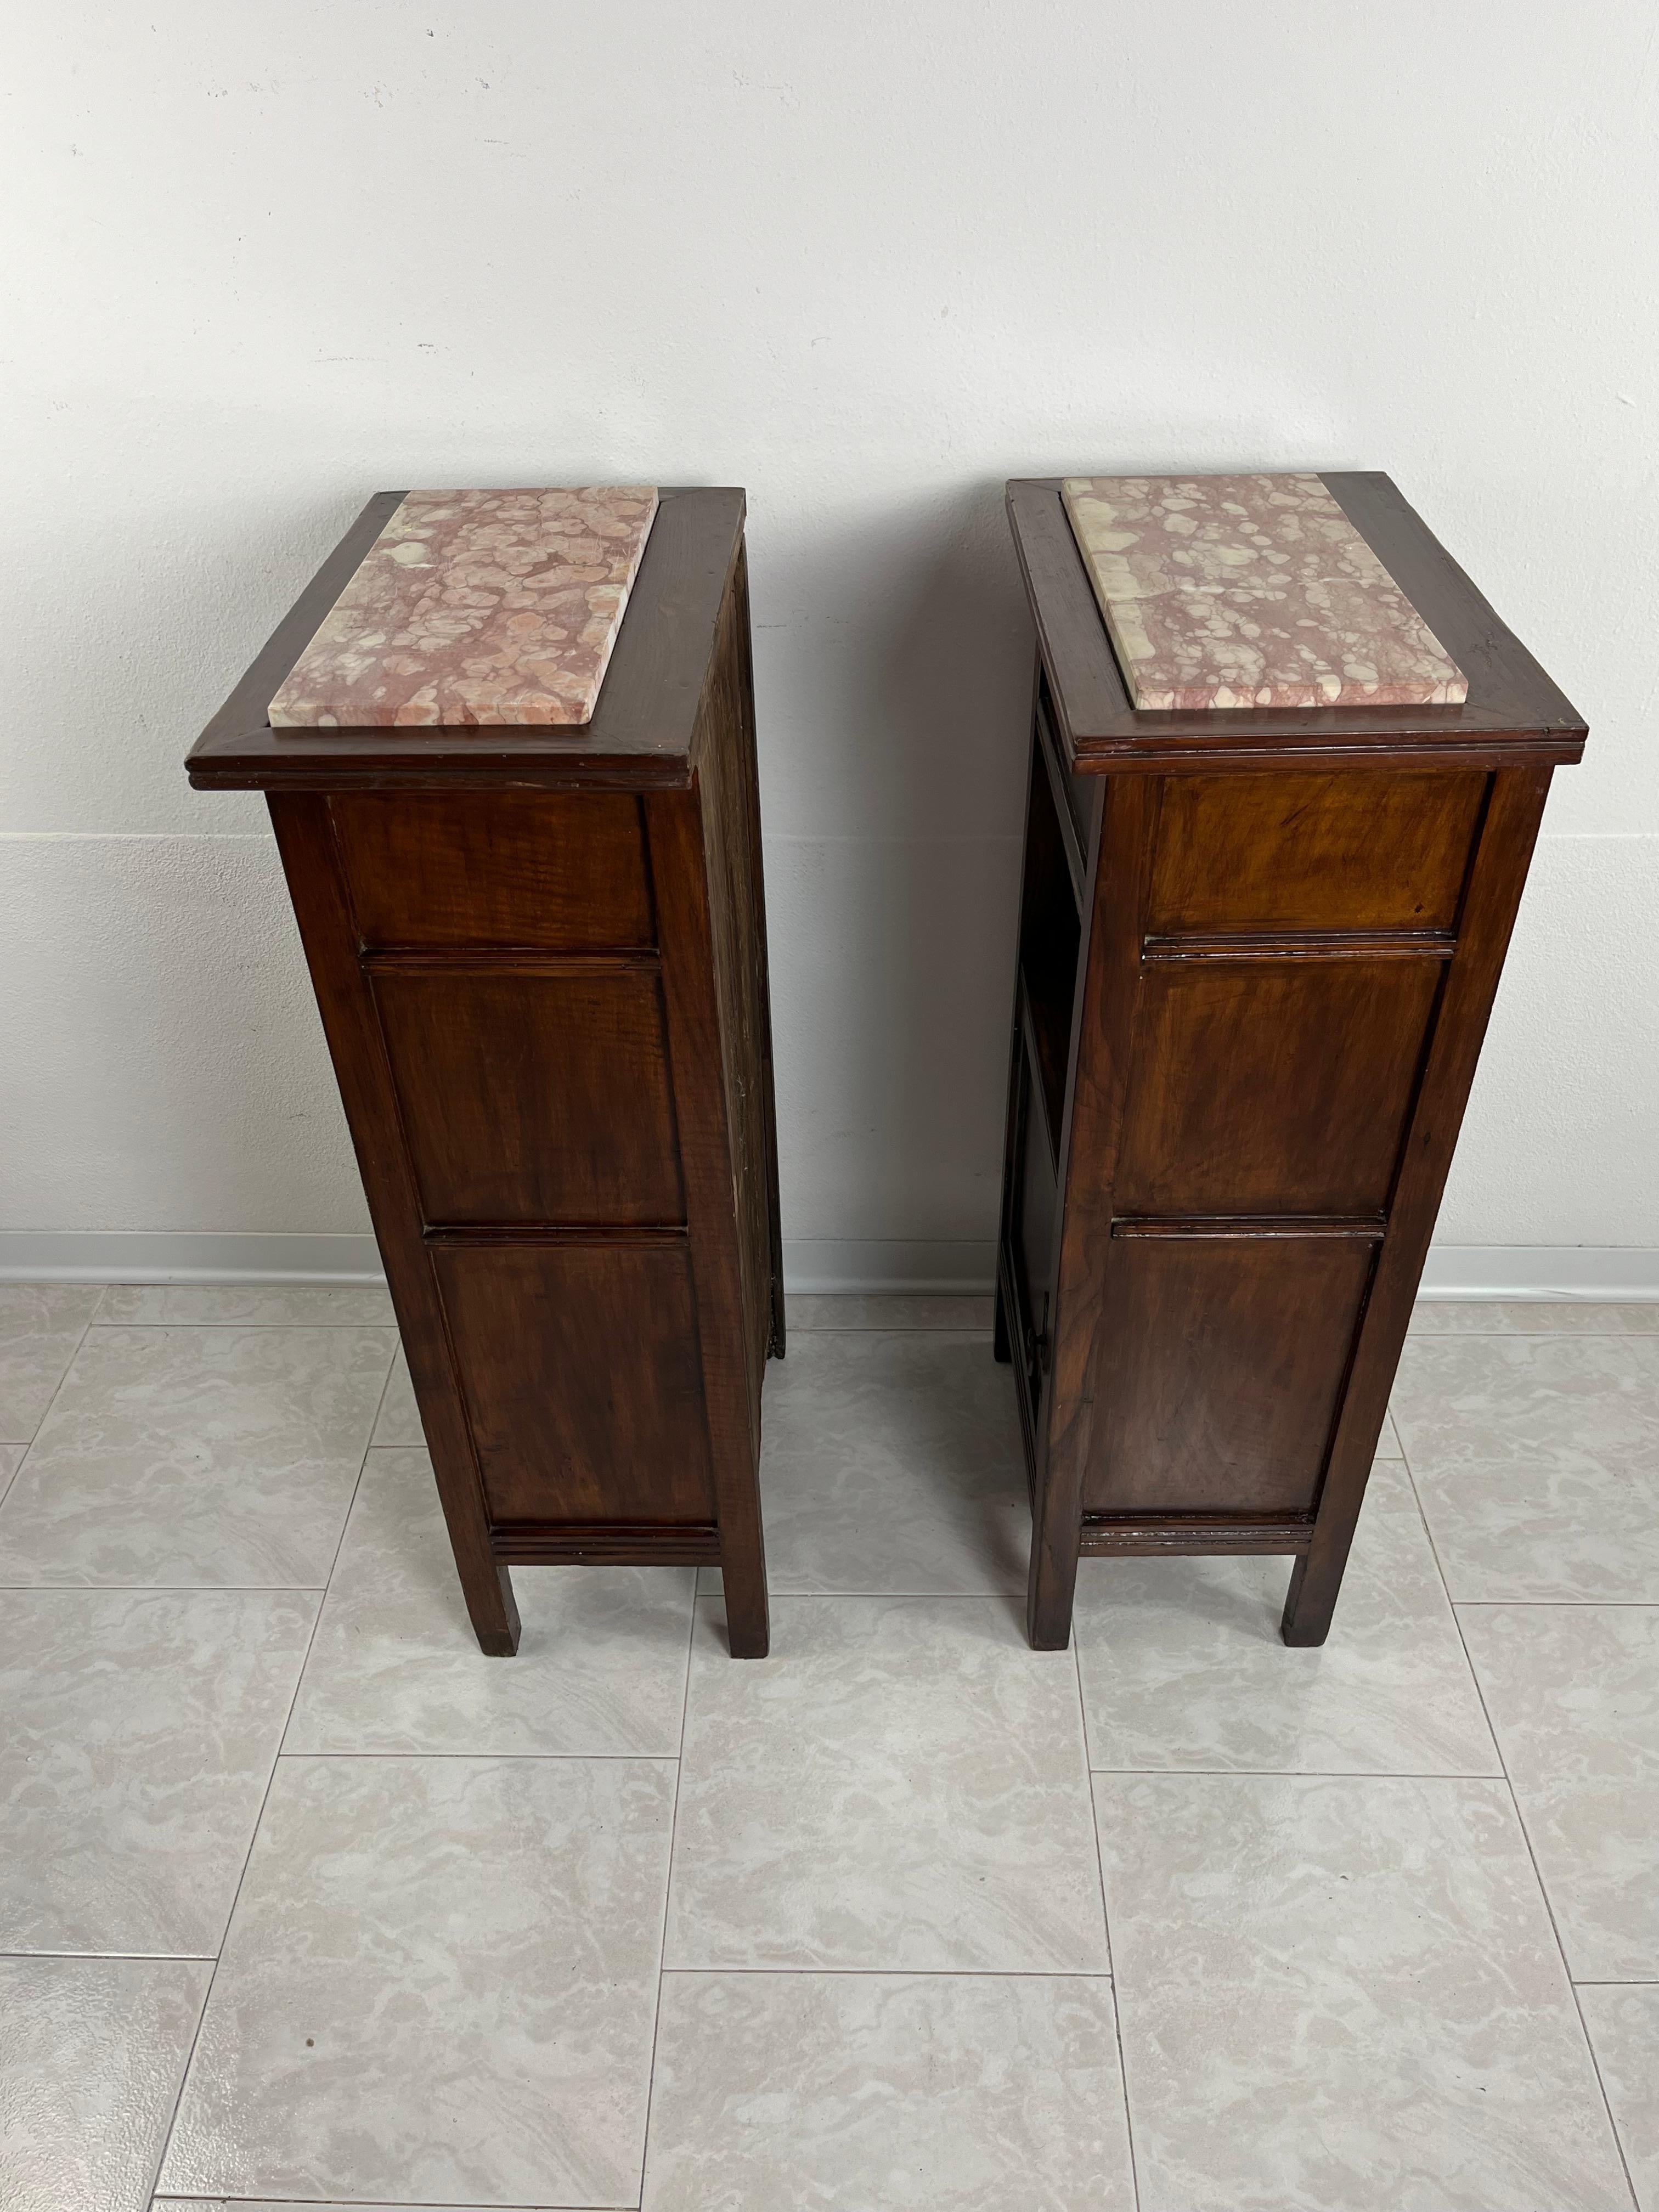 Set Of 2 Mid-Century Sicilian Wood And Marble Bedside Tables 1930s For Sale 2